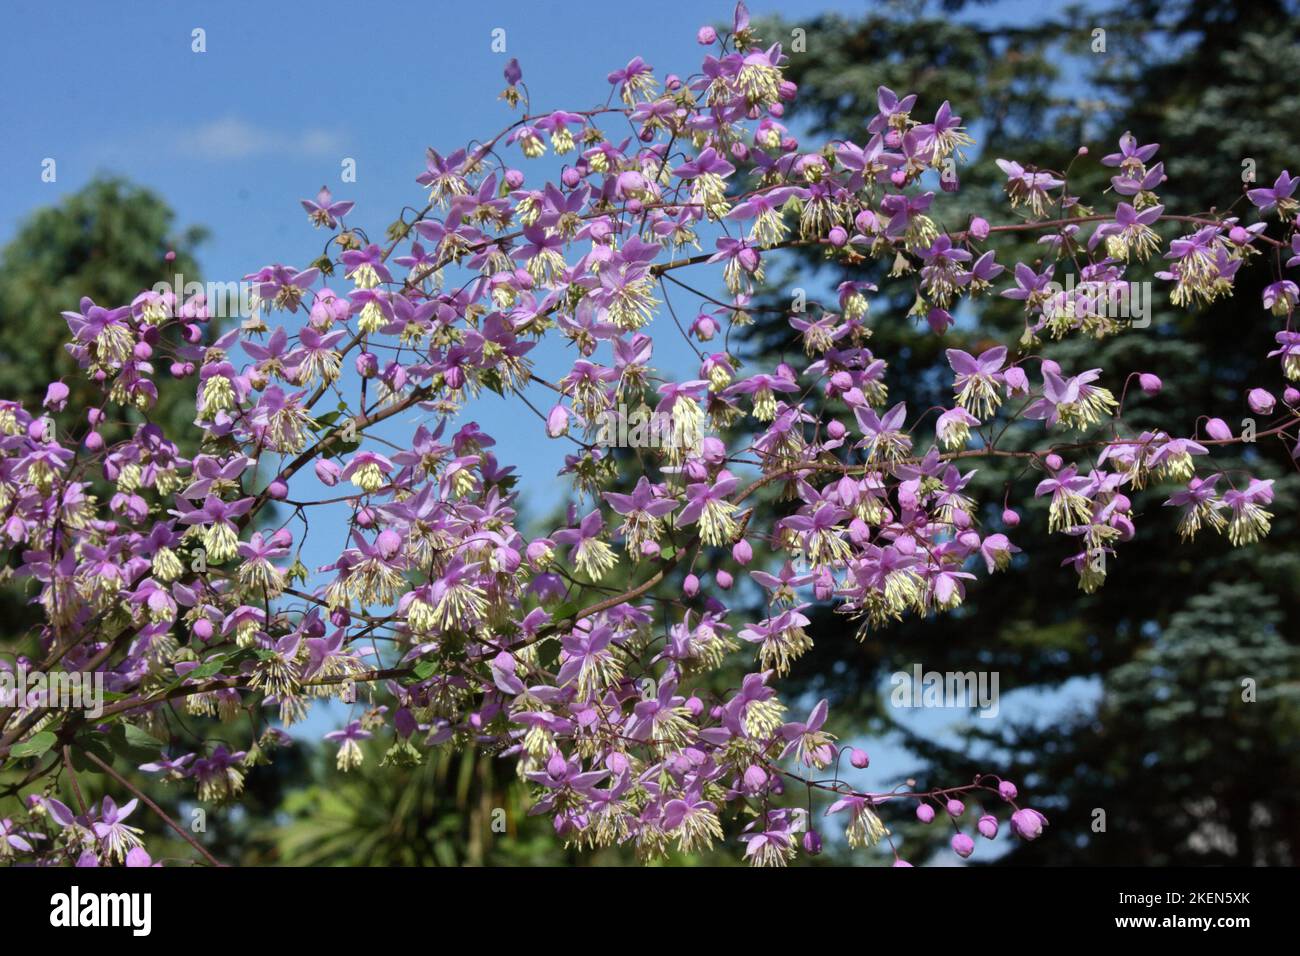 Flowers of Chinese Meadow Rue (Thalictrum delavayi) against blue sky. Stock Photo